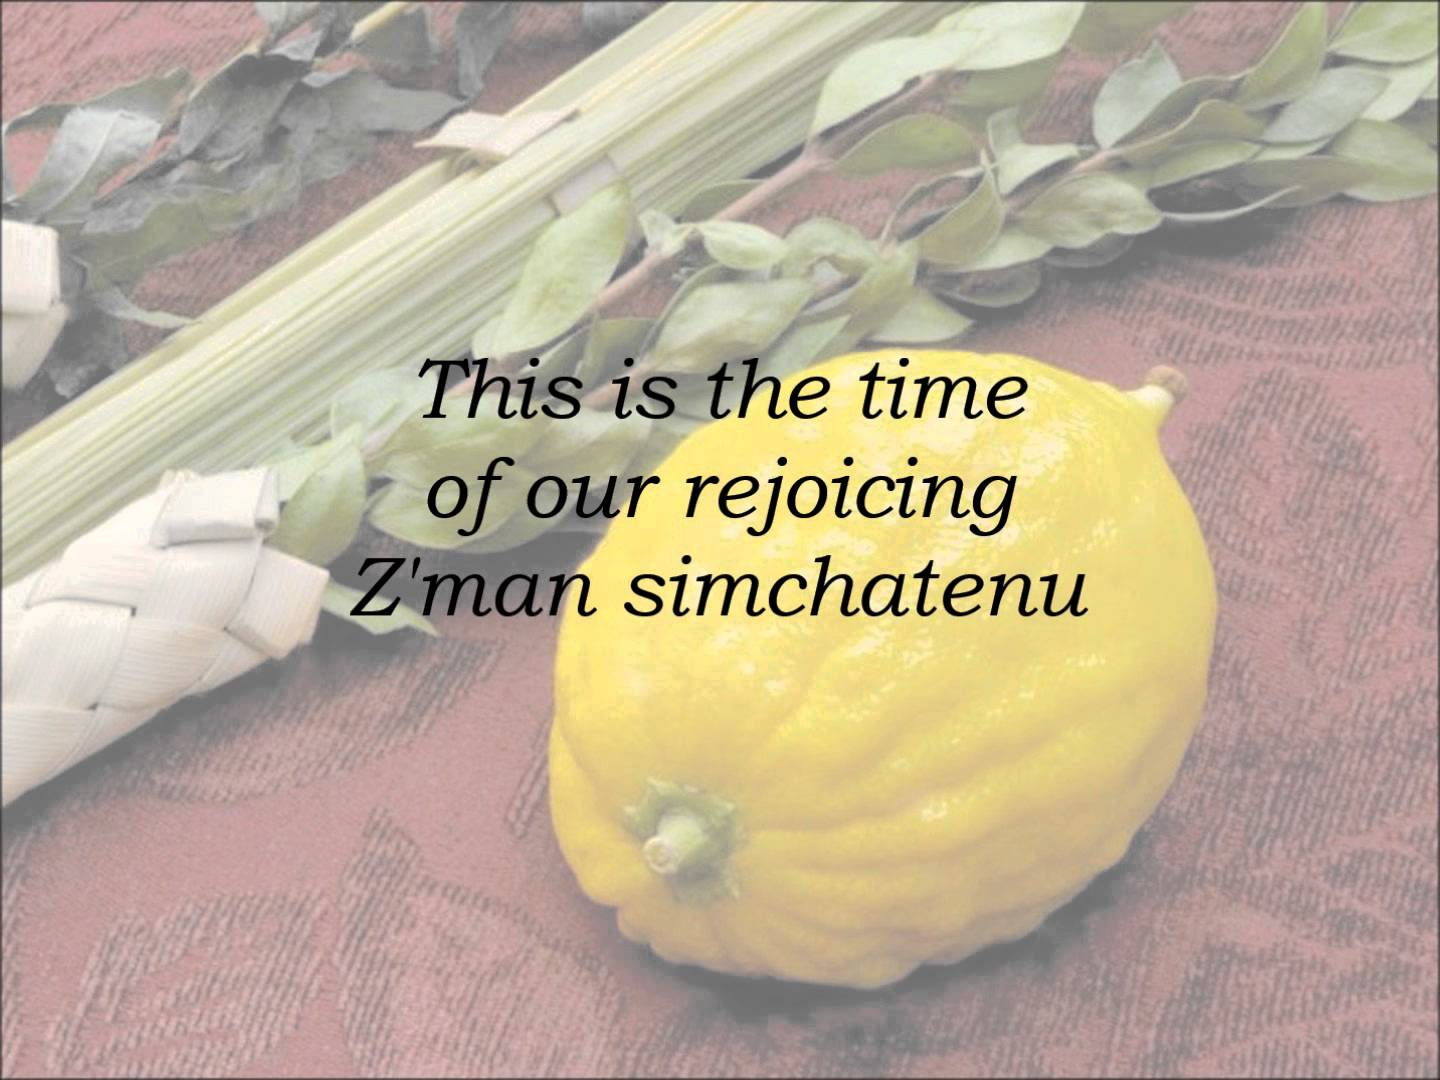 The Sukkot Song: The Time of Our Rejoicing